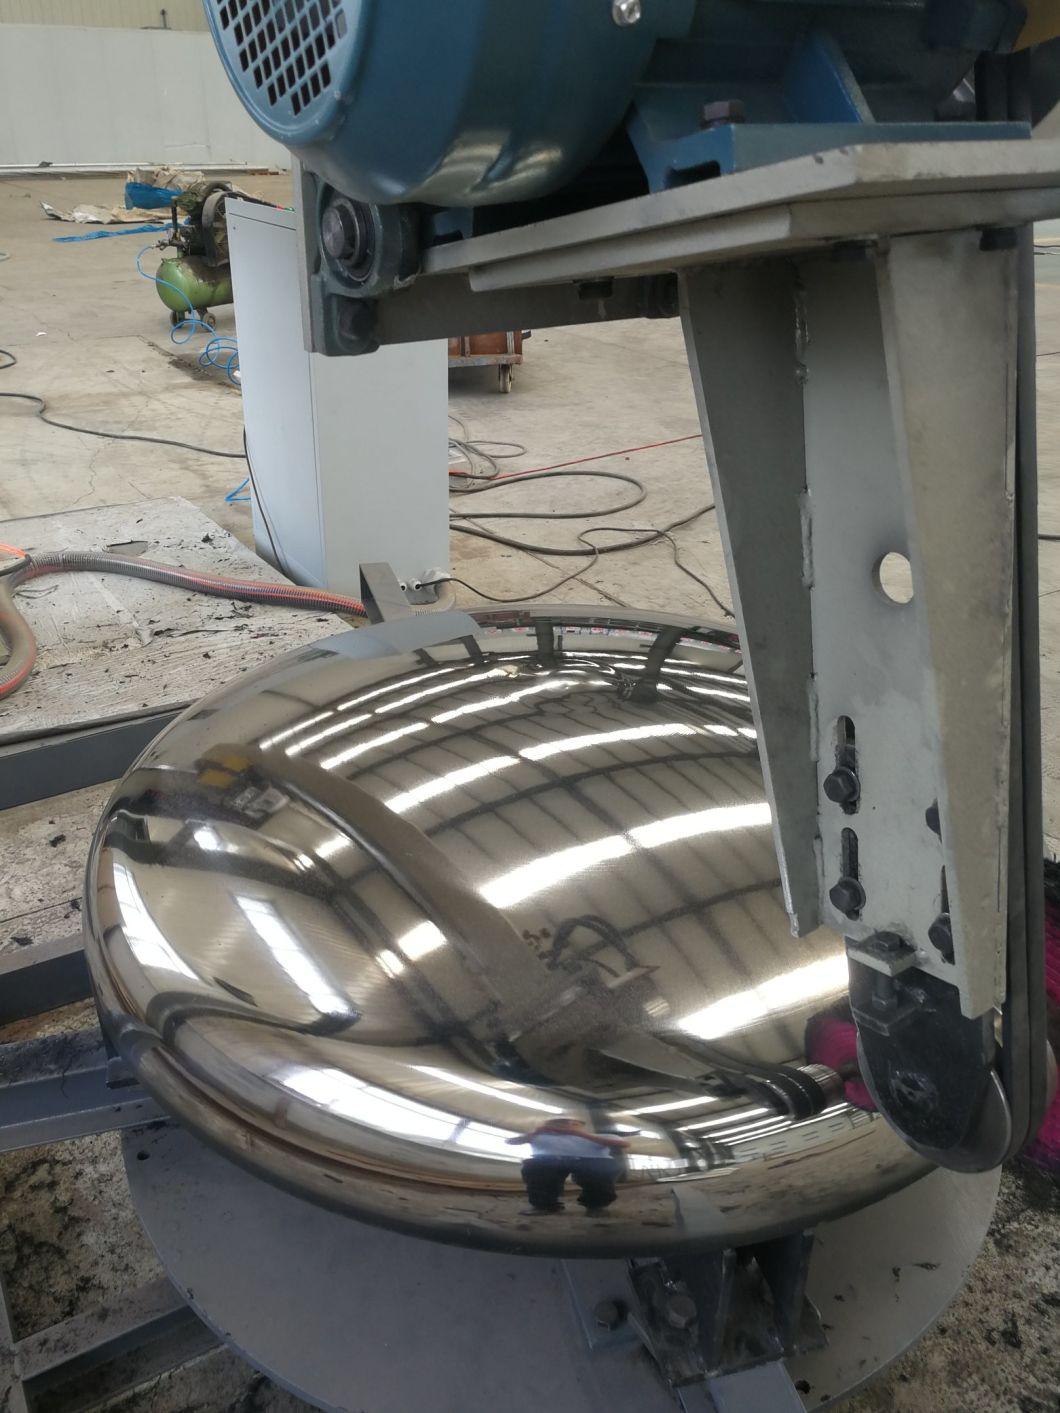 Progromable Dish Head Grinding and Polishing Machine to Achieve Mirror Effective